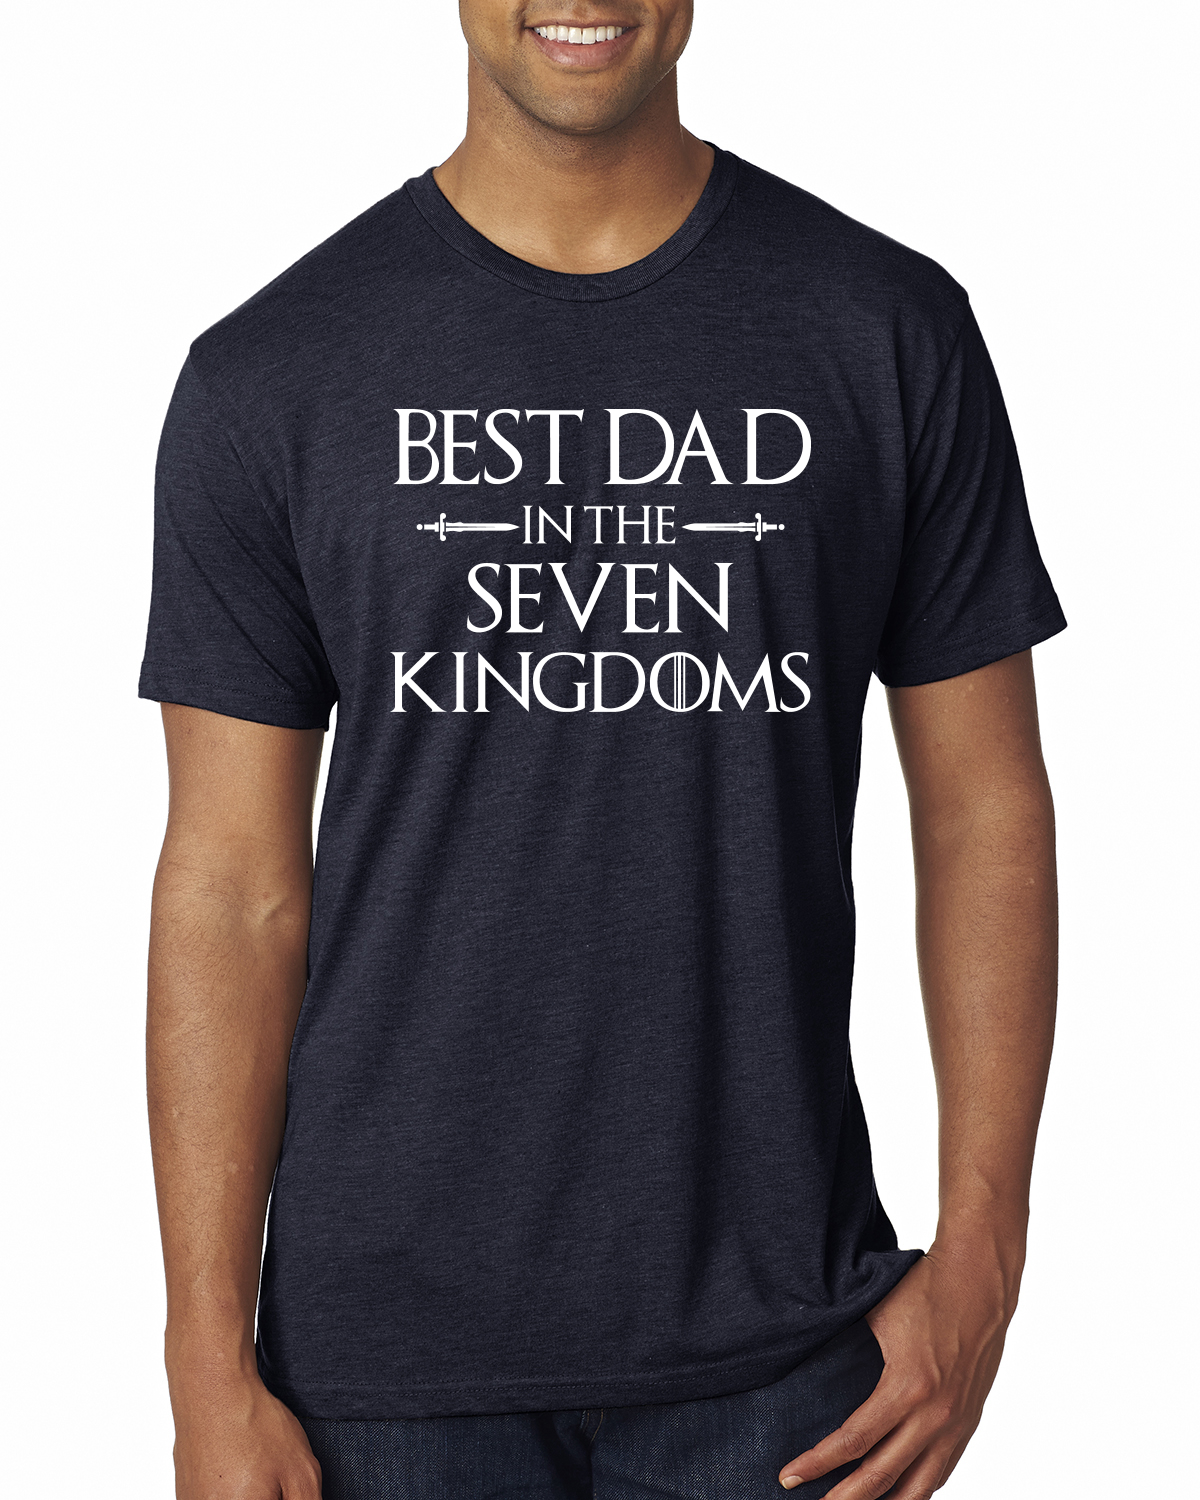 Gold Best Dad In The Seven Kingdoms Fathers Day t shirt,Game of Thrones tshirt 